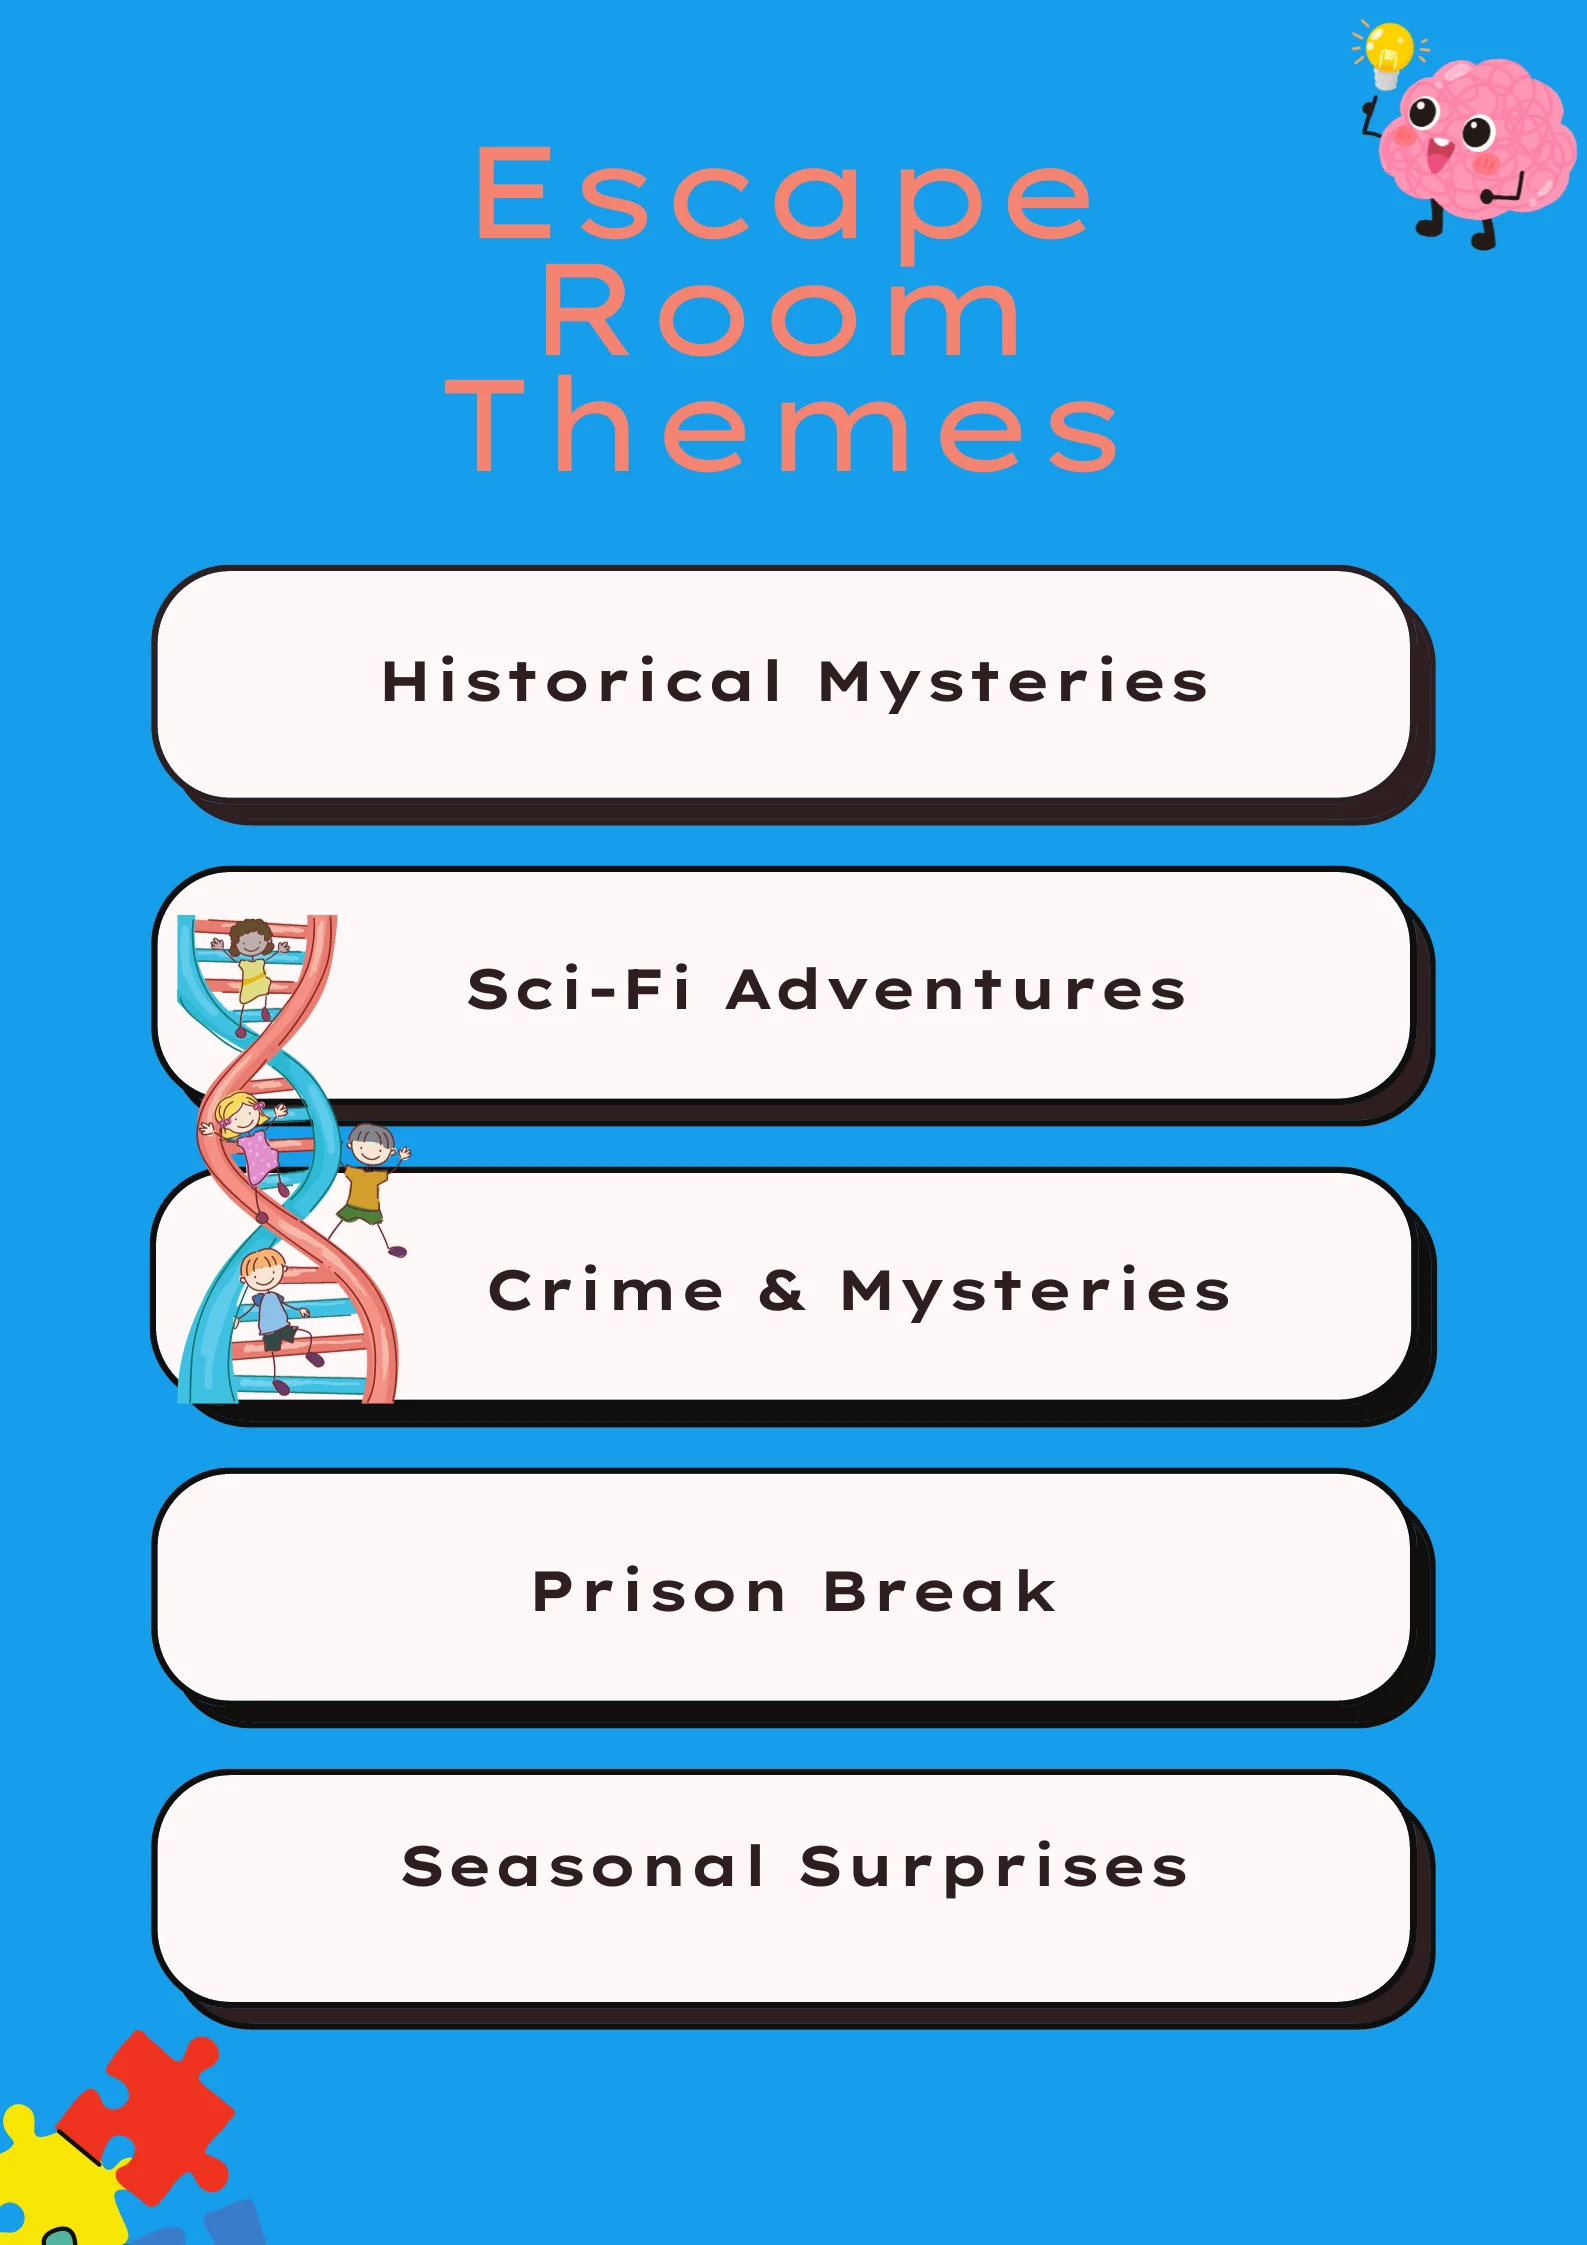 A chart of escape room themes